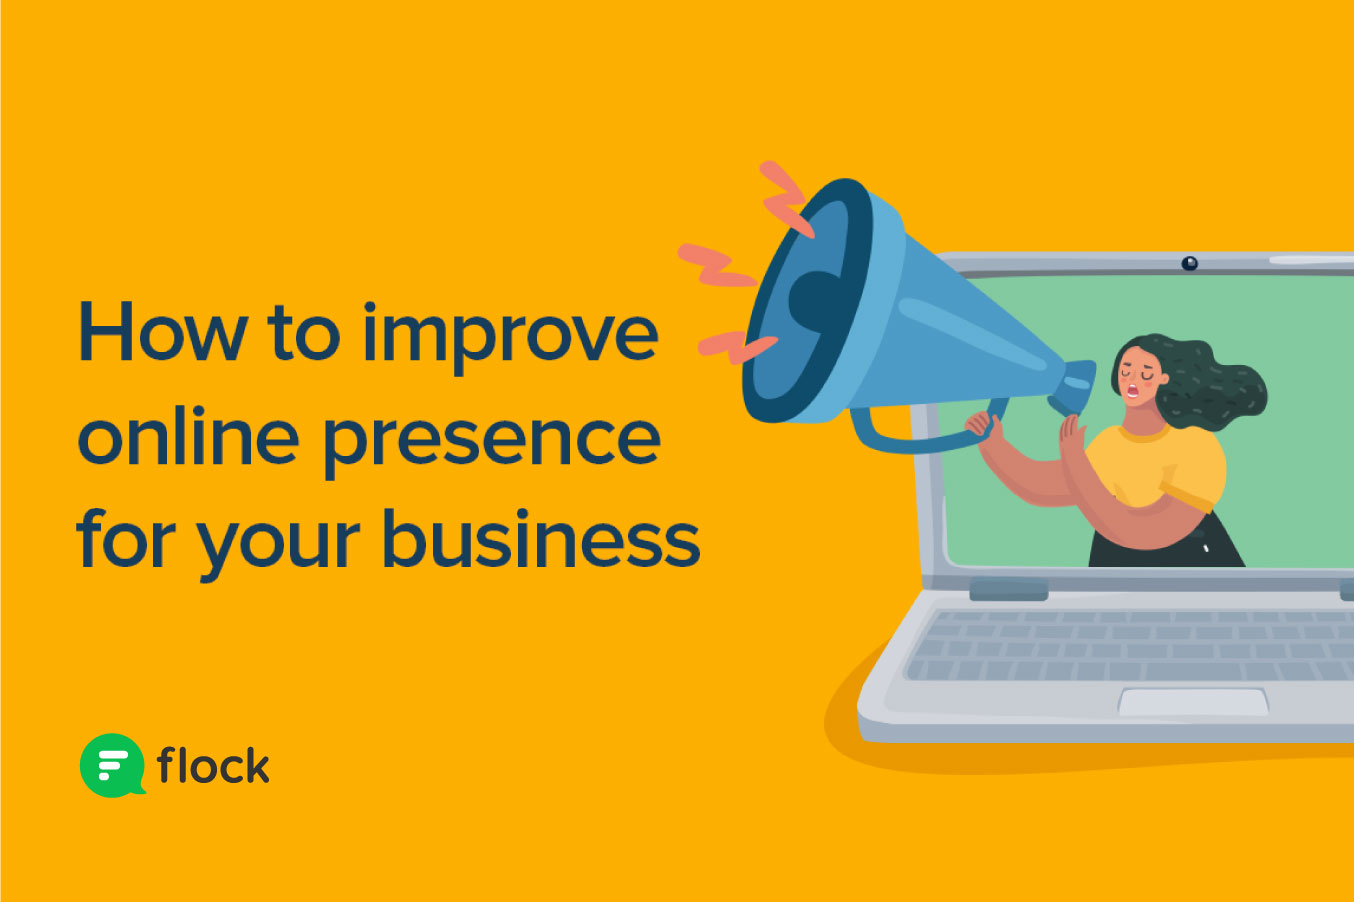 Everything you need to know about online presence for your business